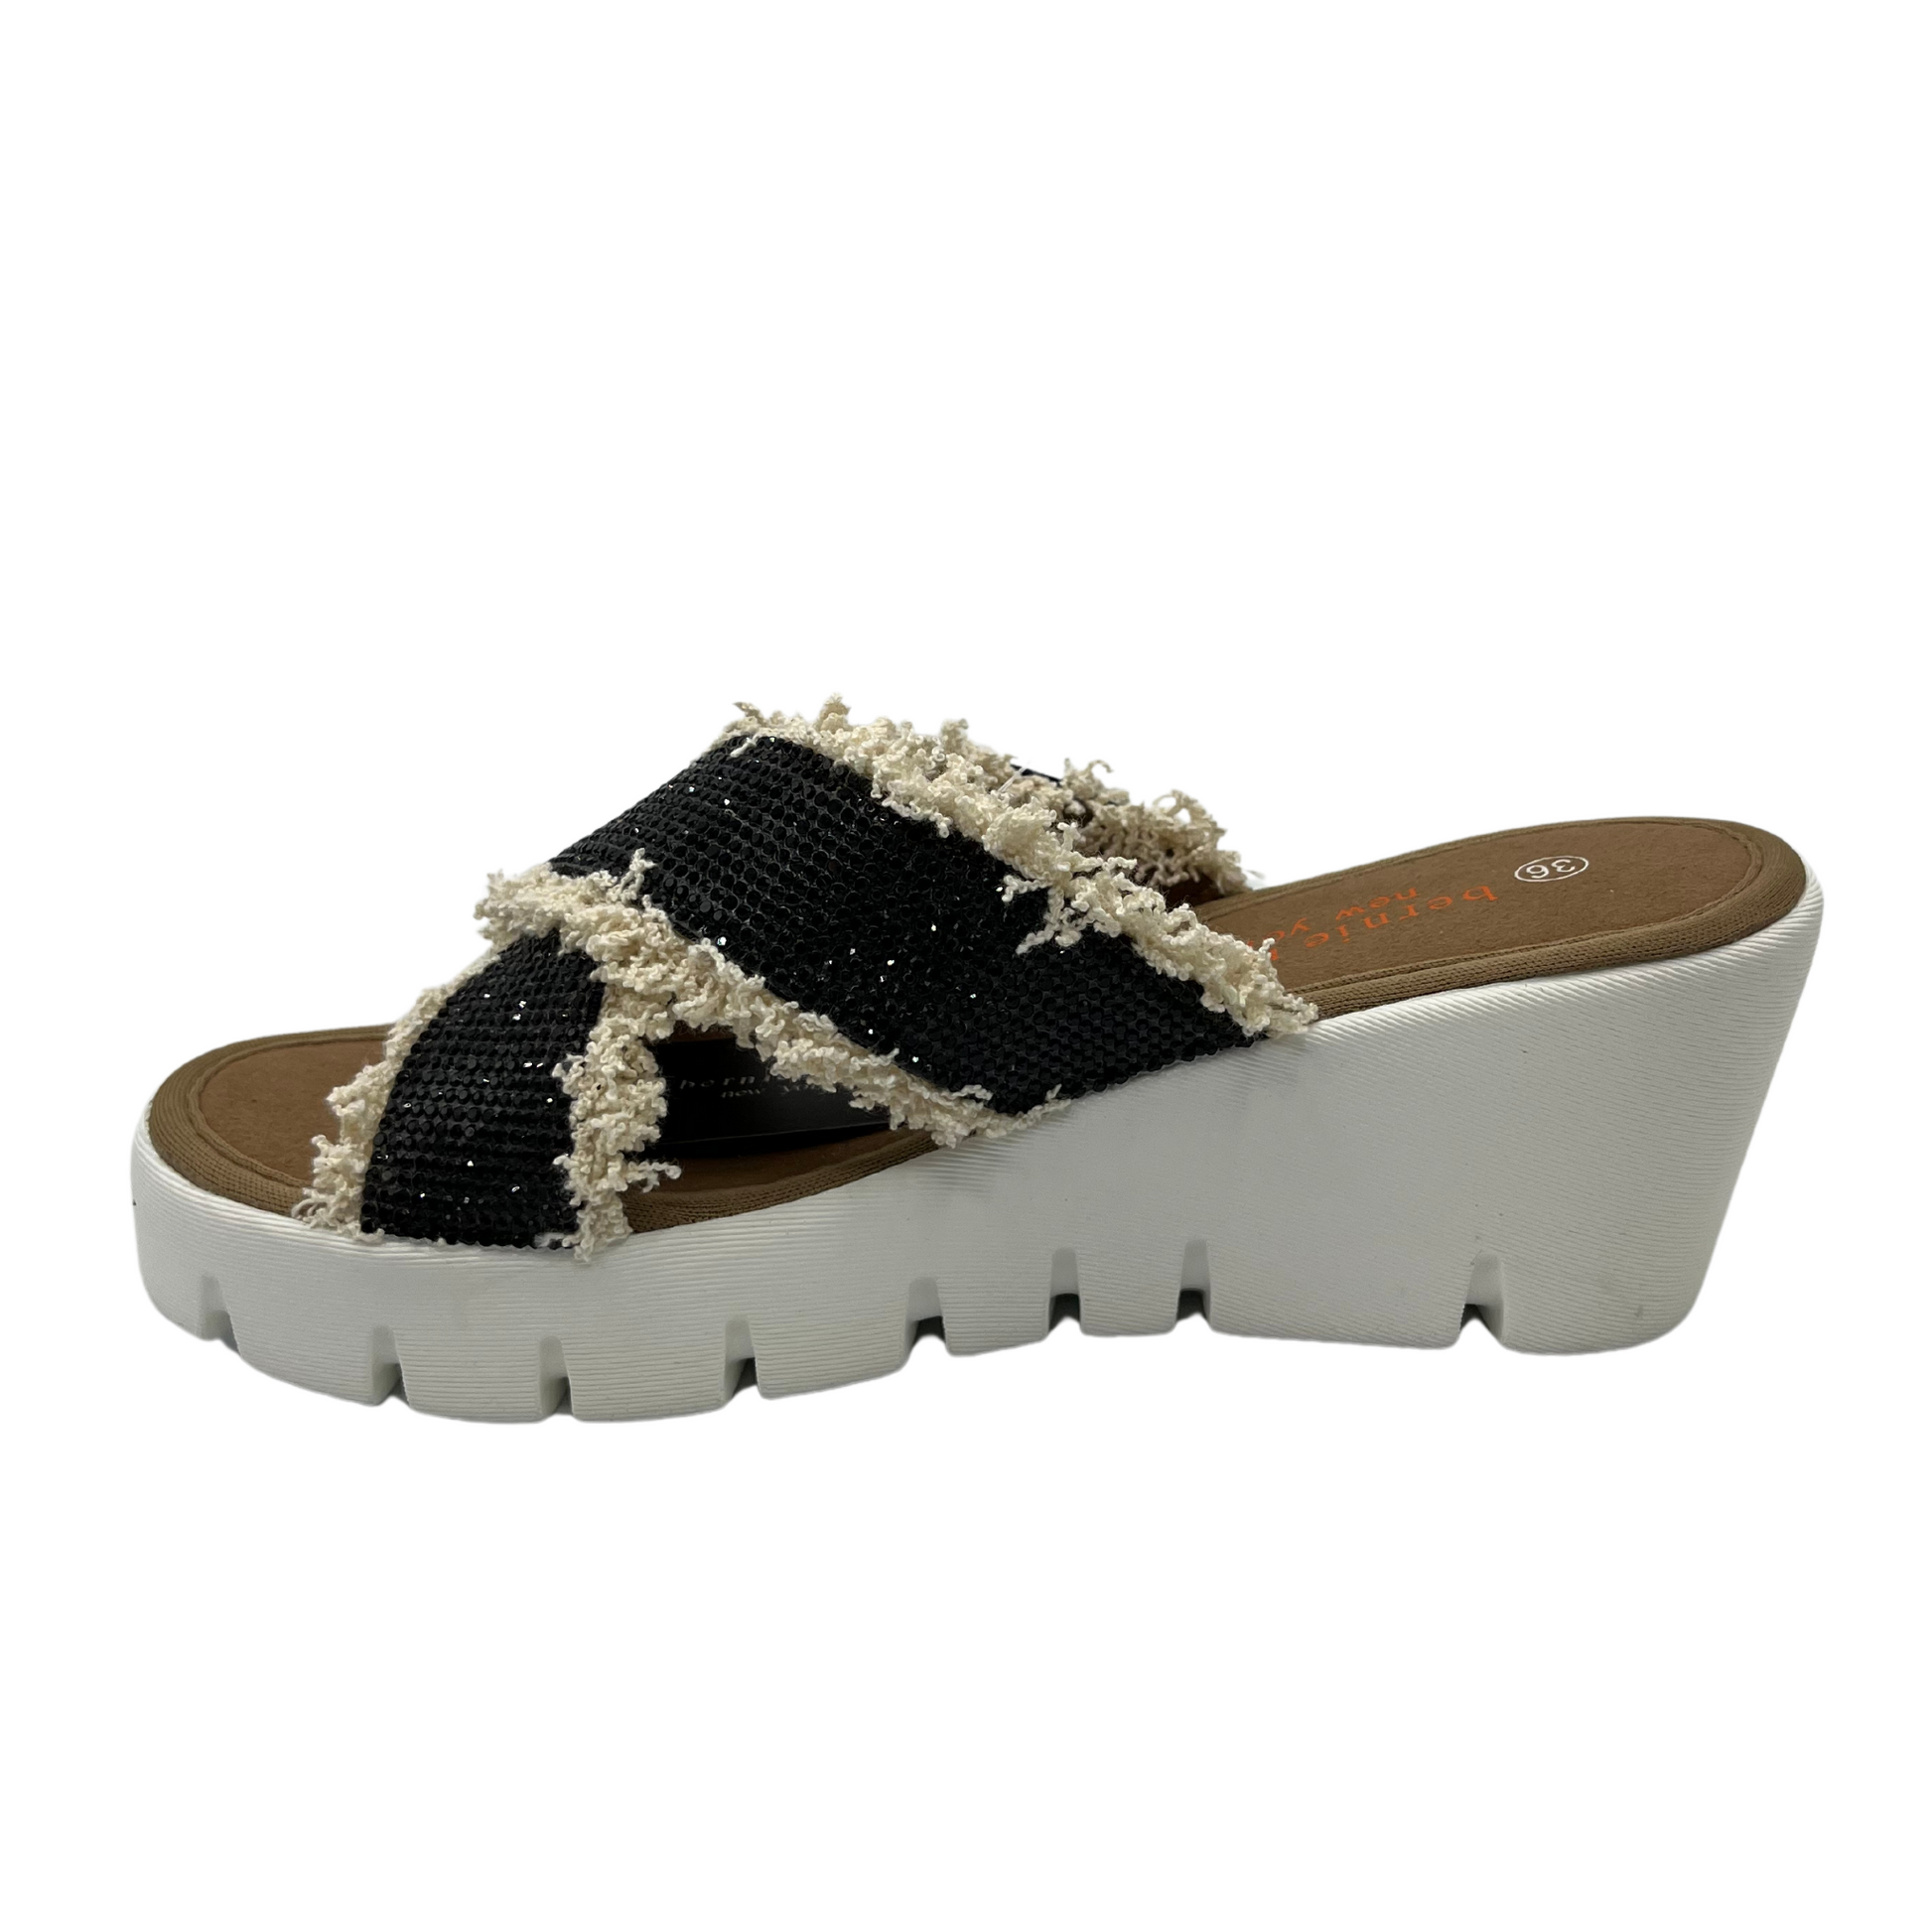 Left facing view of black rhinestone strapped sandals with fringe detail and white wedge heel